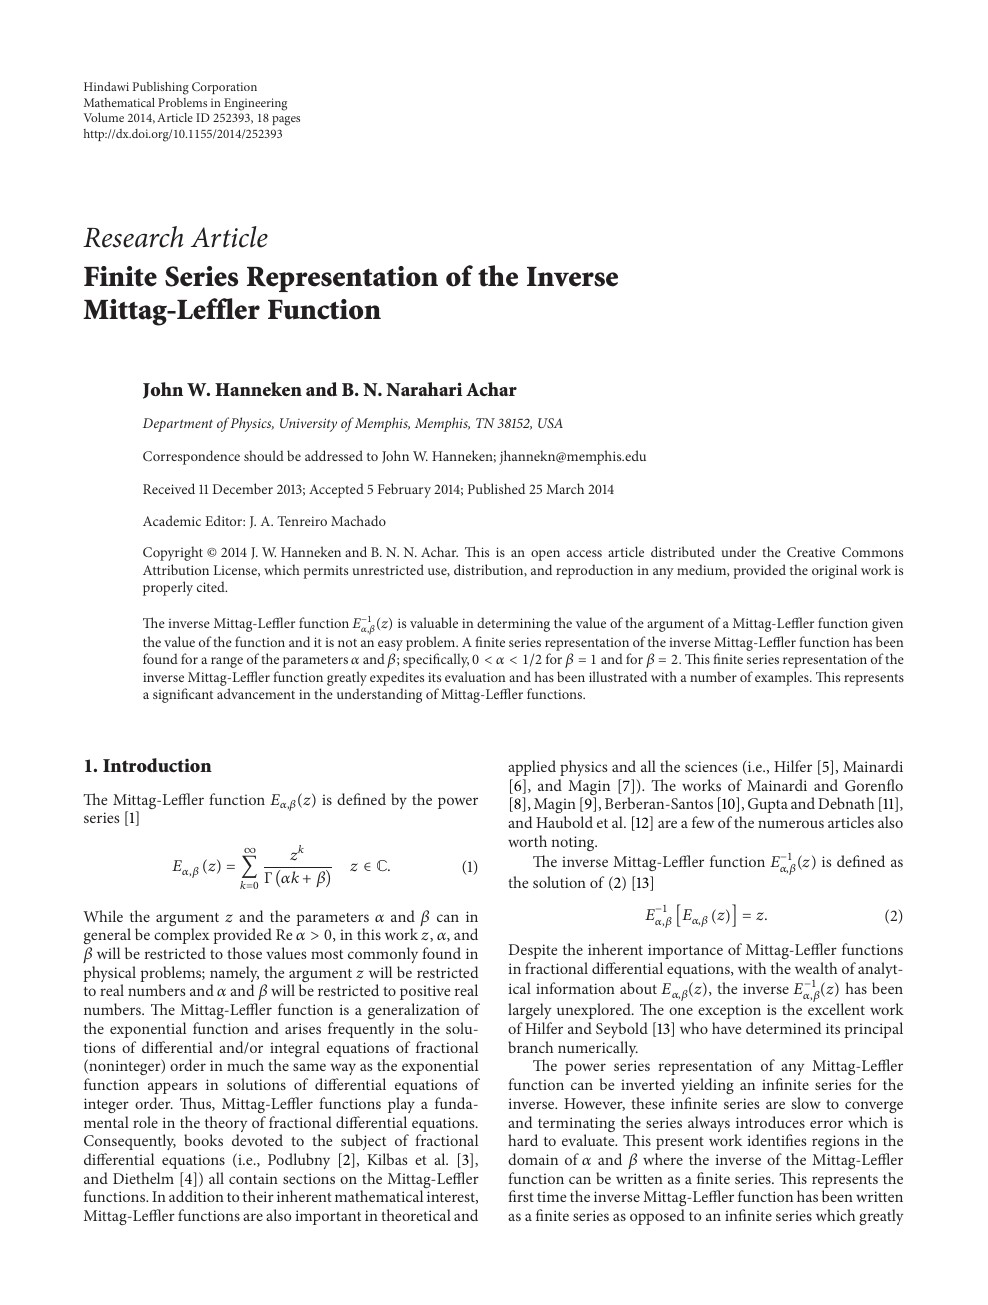 Finite Series Representation Of The Inverse Mittag Leffler Function Topic Of Research Paper In Mathematics Download Scholarly Article Pdf And Read For Free On Cyberleninka Open Science Hub